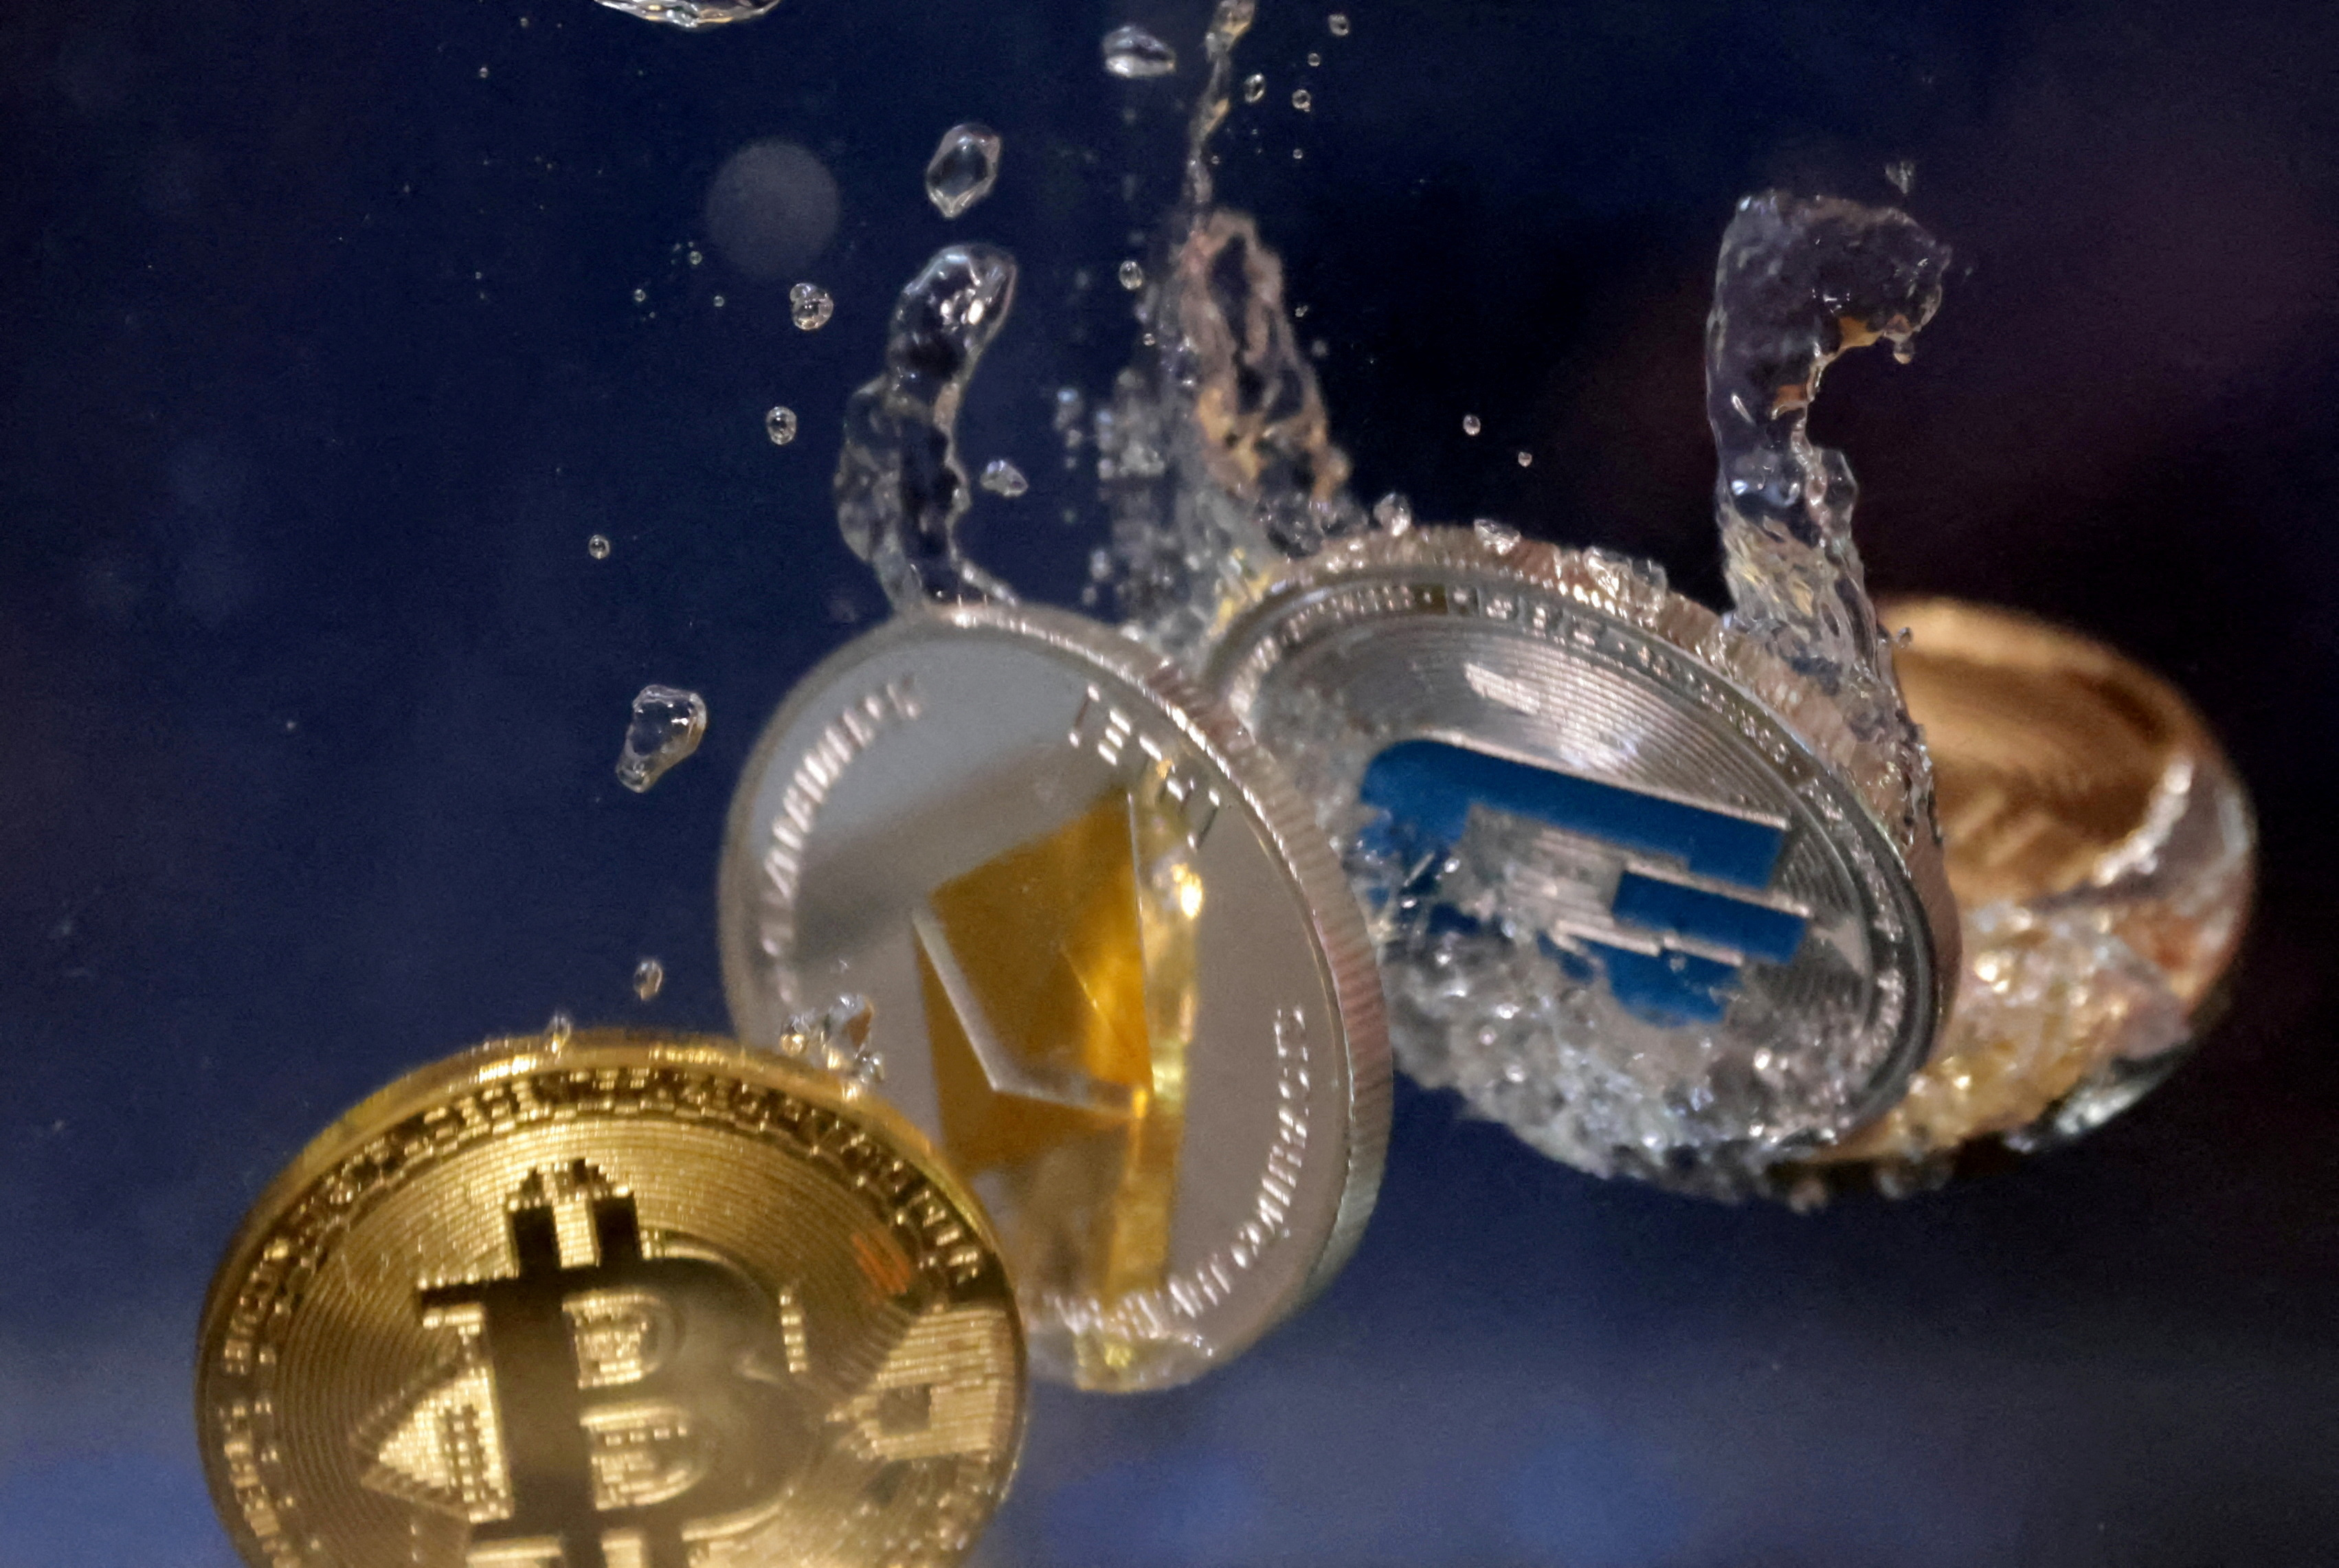 FILE PHOTO: Representations of cryptocurrency Bitcoin, Ethereum and Dash plunge into water in this illustration taken, May 23, 2022. REUTERS/Dado Ruvic/File Photo